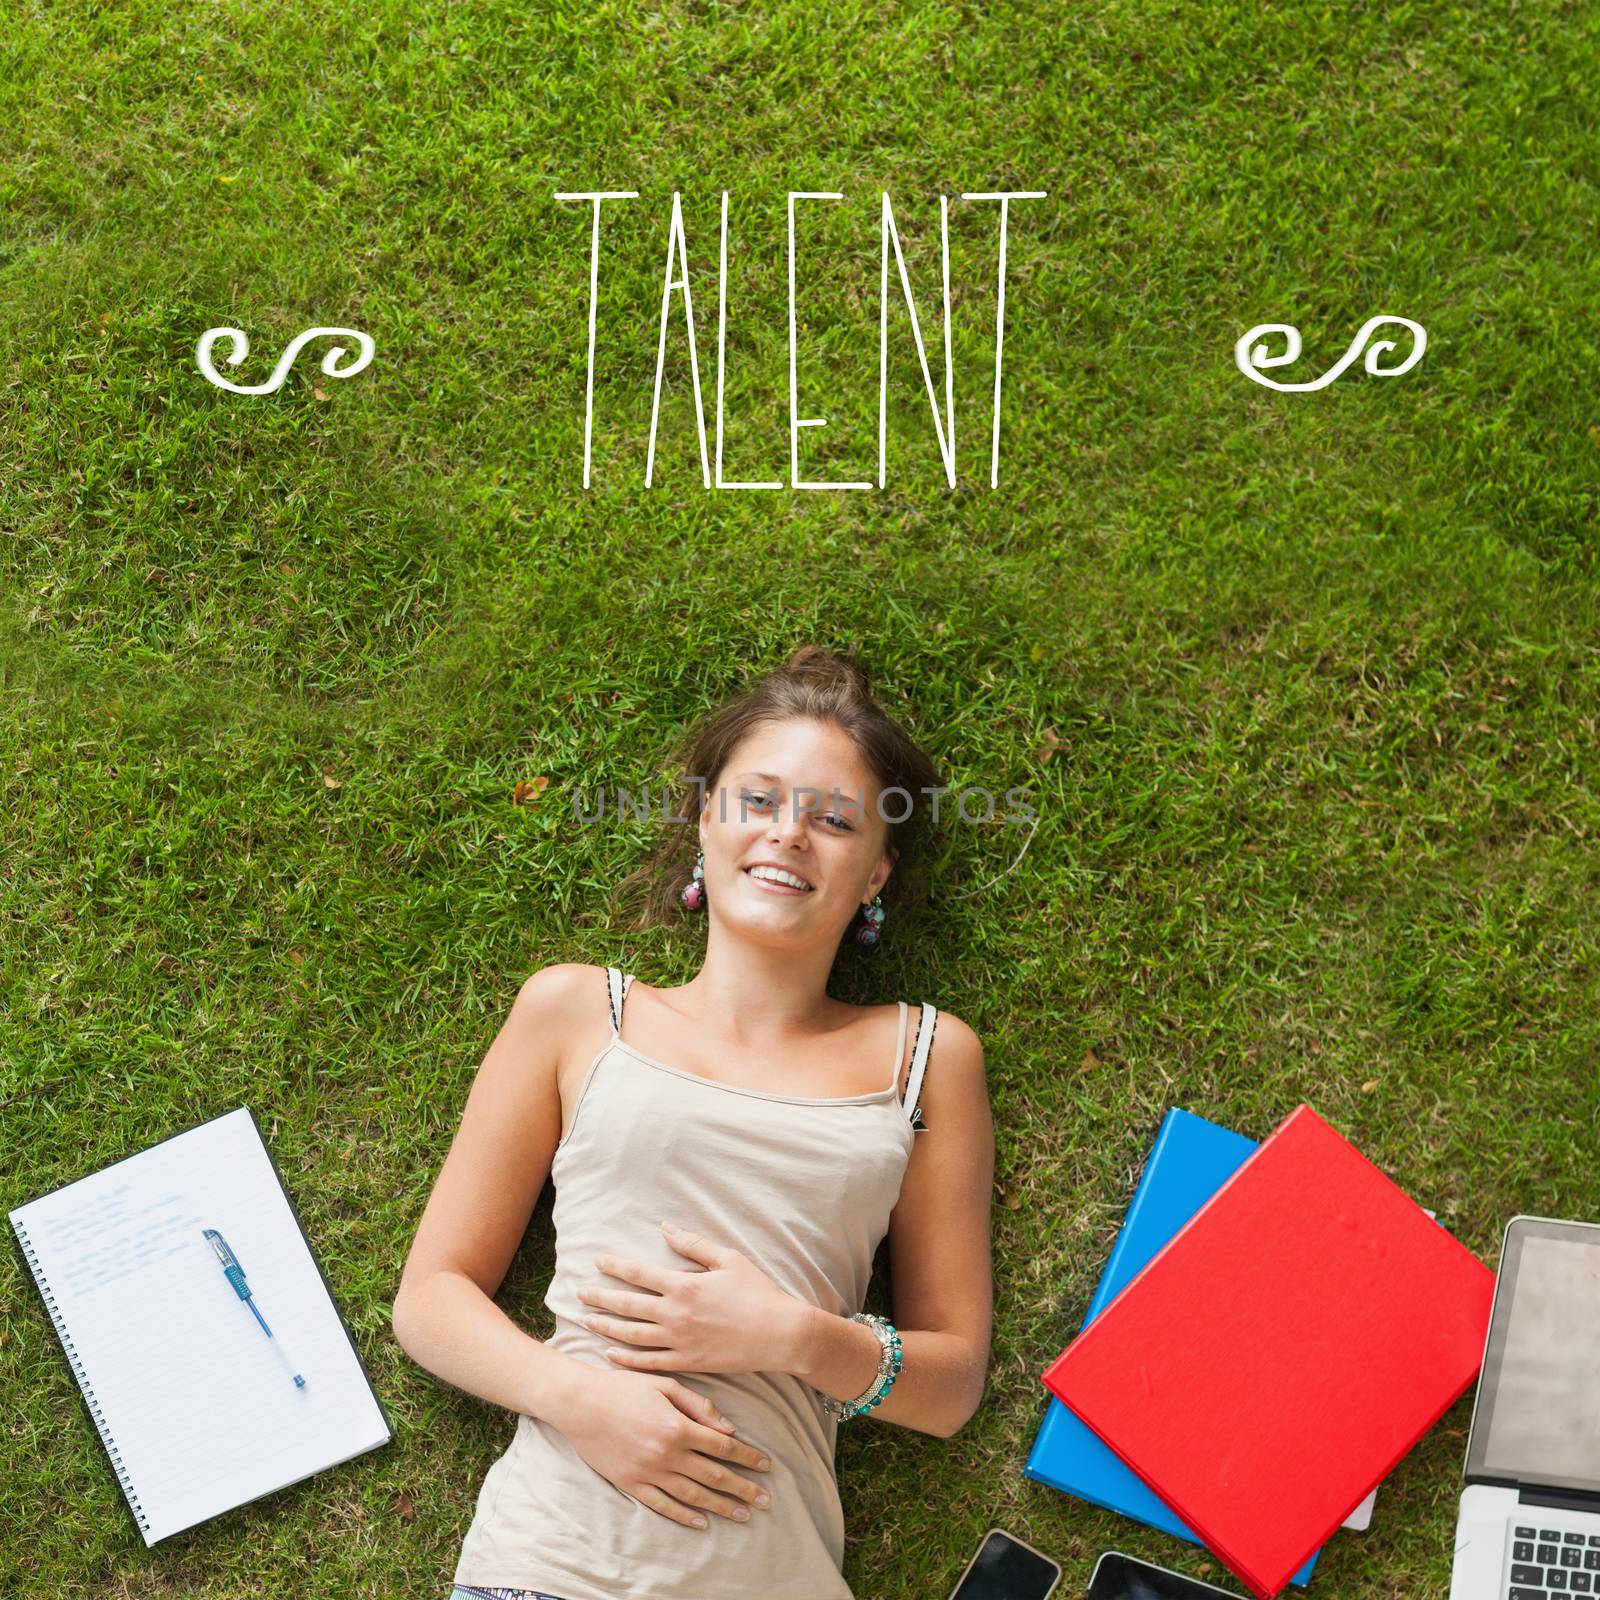 The word talent against pretty student lying on grass